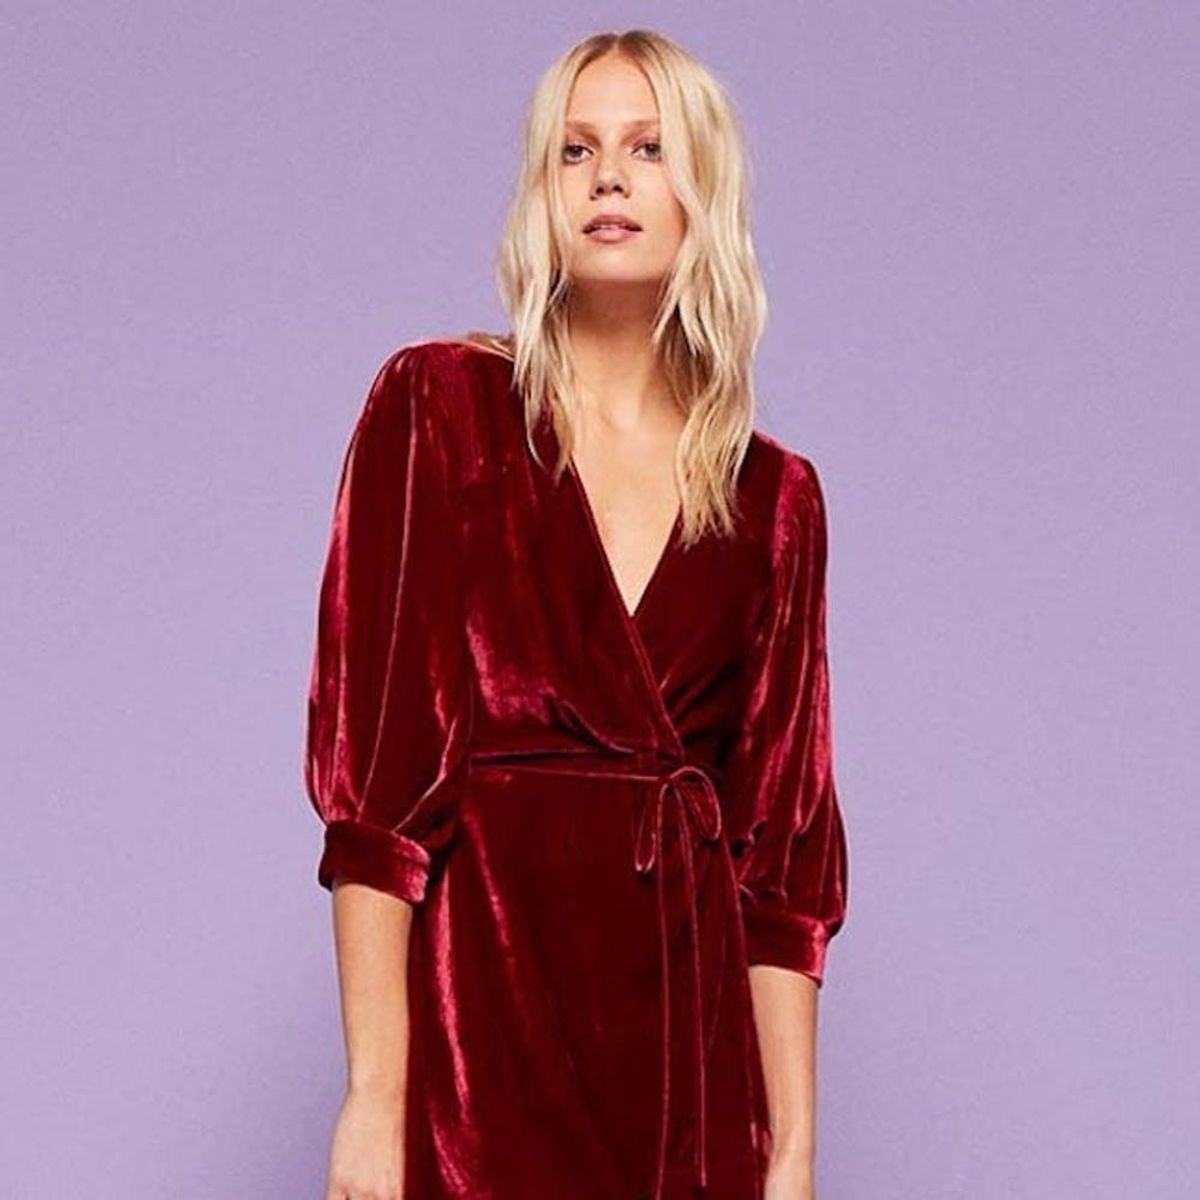 17 Cyber Monday Style Finds to Snag Before Day’s End